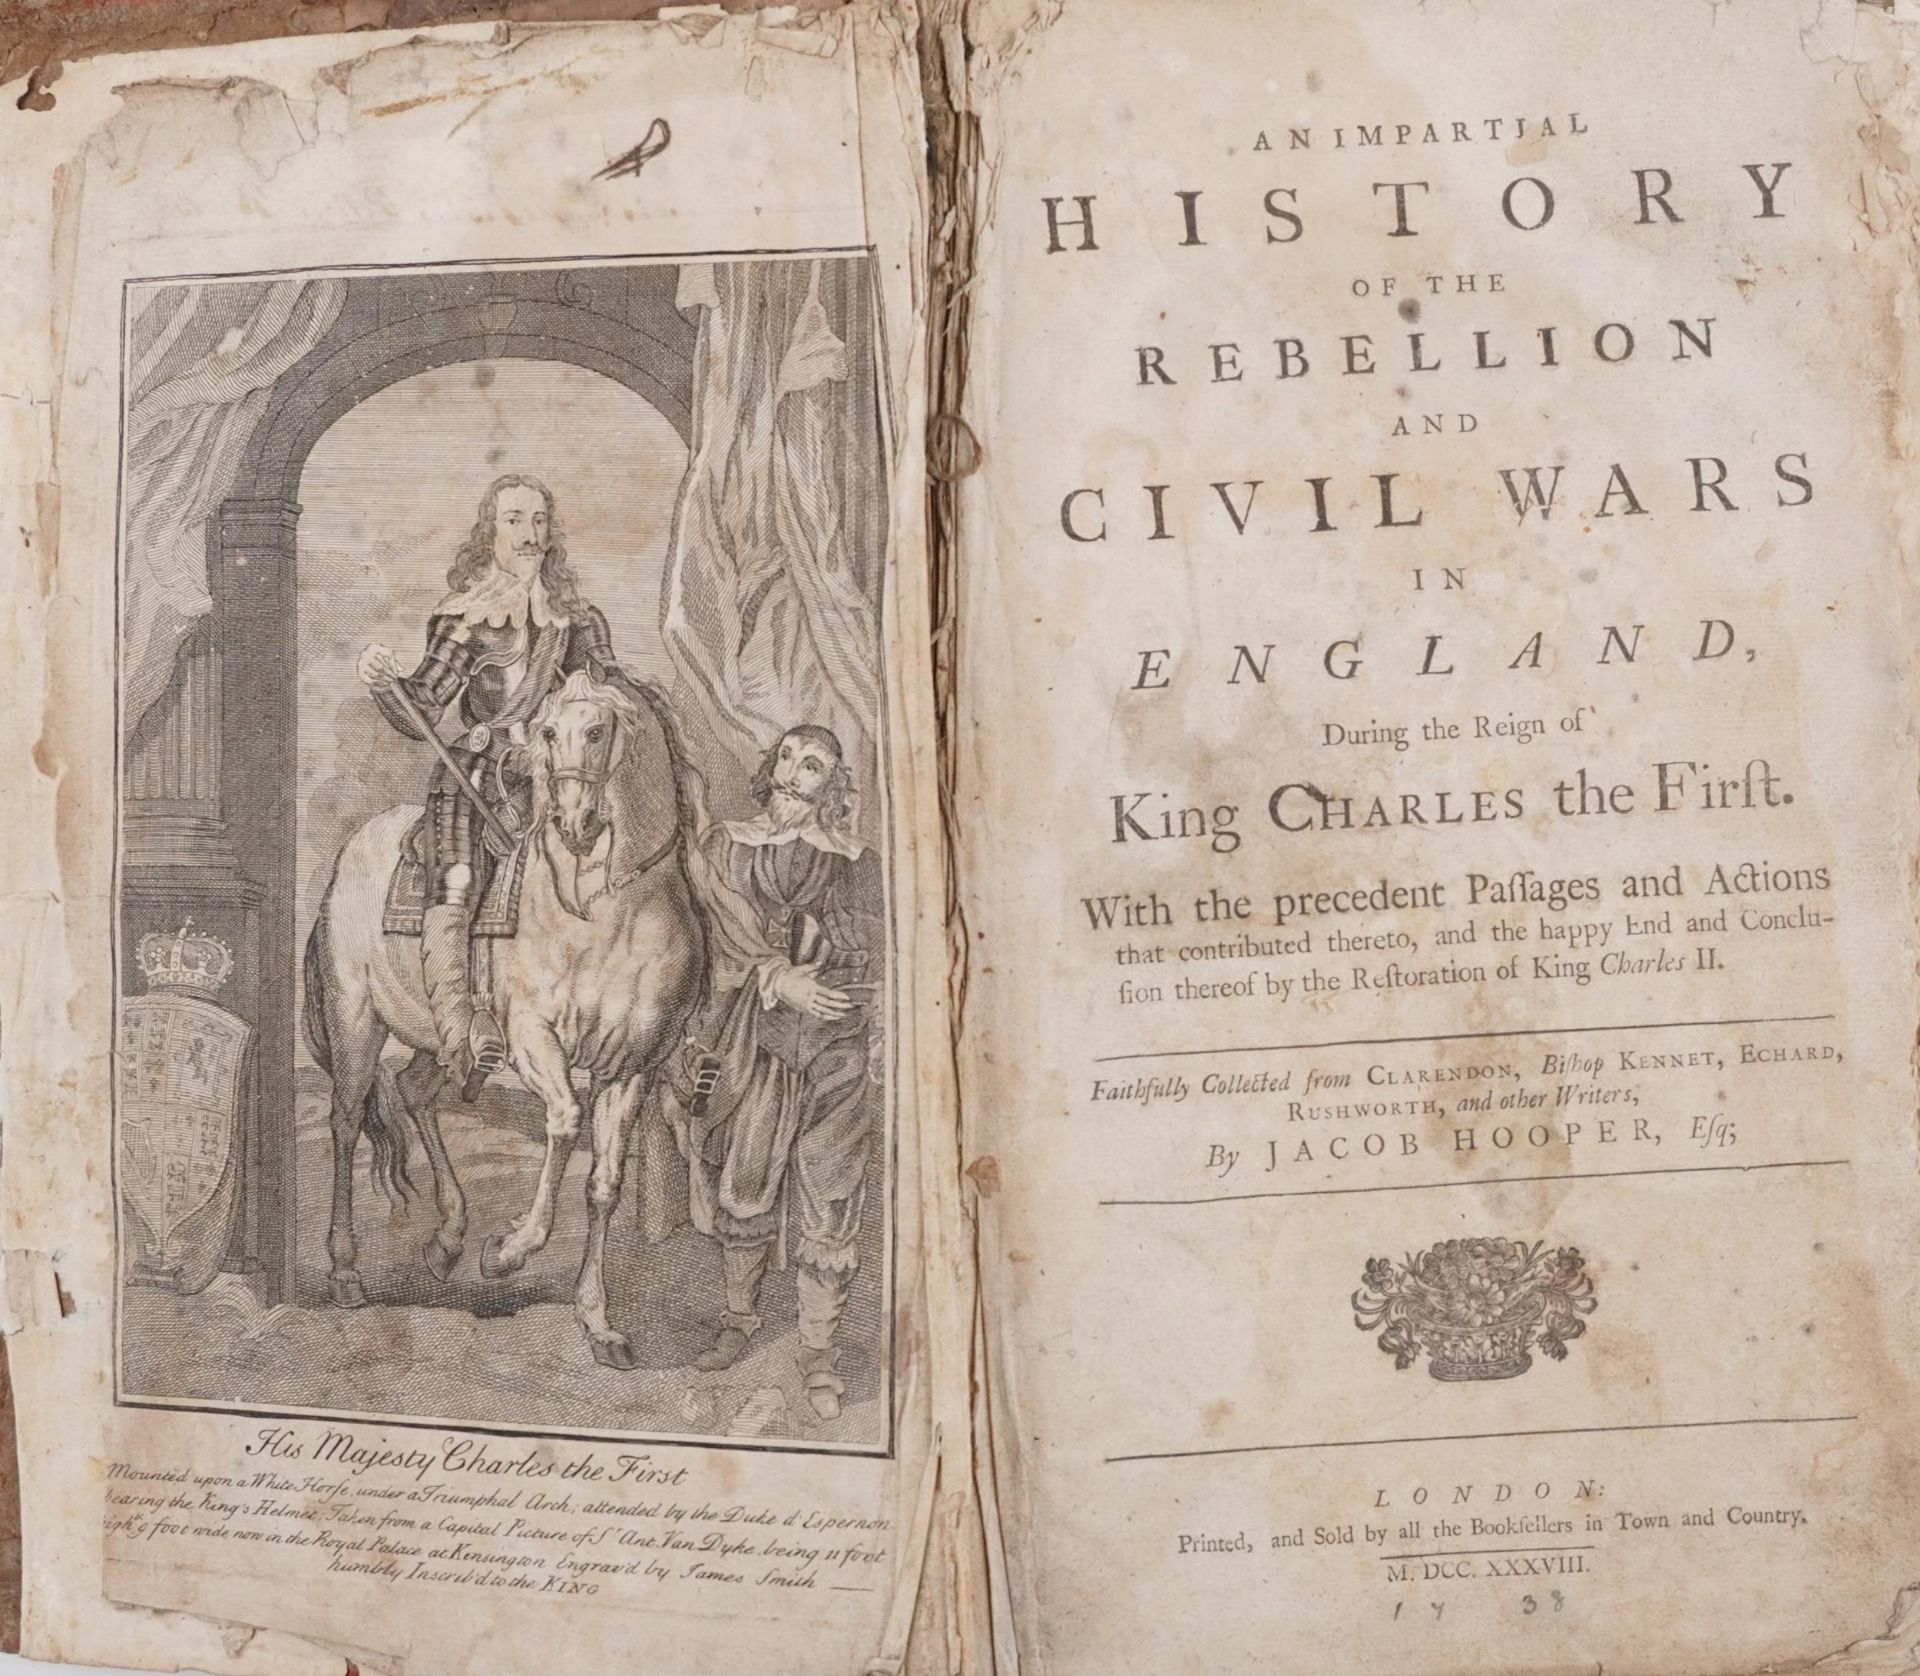 Impartial History of the Rebellion and Civil Wars in England During the Reign of Charles I, early - Image 2 of 3